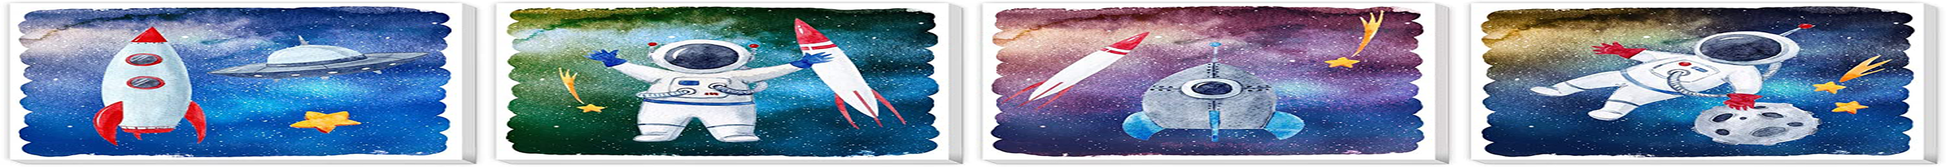 TEXTURE OF DREAMS Cartoon Astronaut Rocket Stars UFO in Outer Space Travel Canvas Wall Art, Boy Room Science Theme Nursery Wall Decor Poster Kid Bedroom Playroom Dorm Classroom 4 Pack (10" x 10")